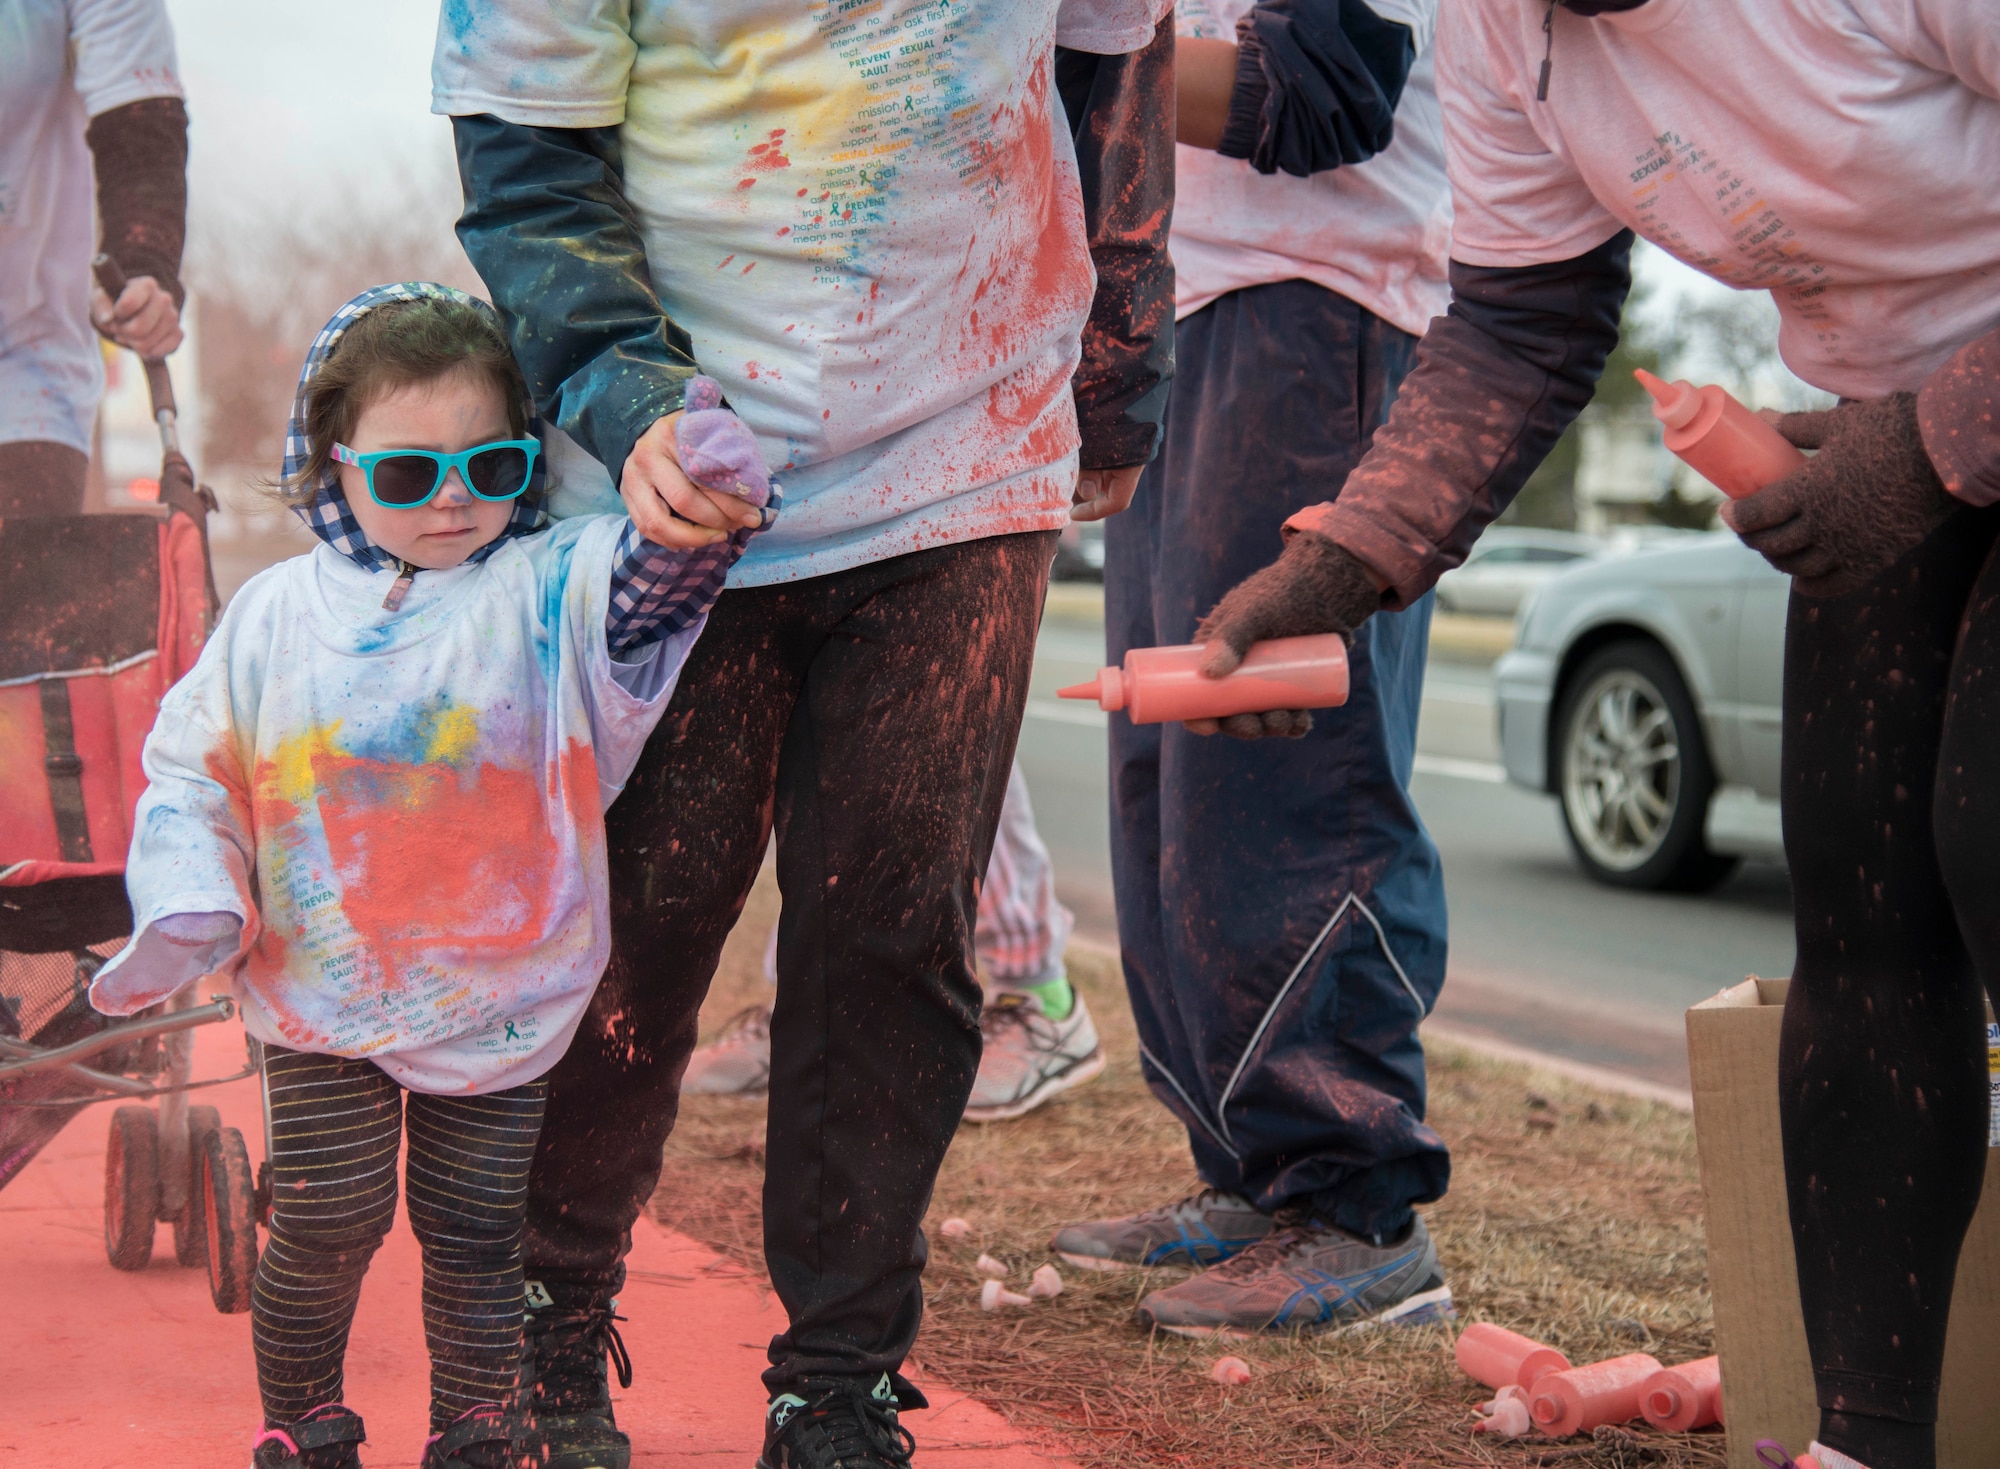 Evelyn, daughter of Staff Sgt. Steven Ramos, 35th Maintanence Squadron munitions control shift supervisor, gets color thrown on her while participating in a color run during Wingman Day at Misawa Air Base, Japan, March 31, 2017. Evelyn was one of nearly 100 participants in the run. (U.S. Air Force Senior Airman Brittany A. Chase)